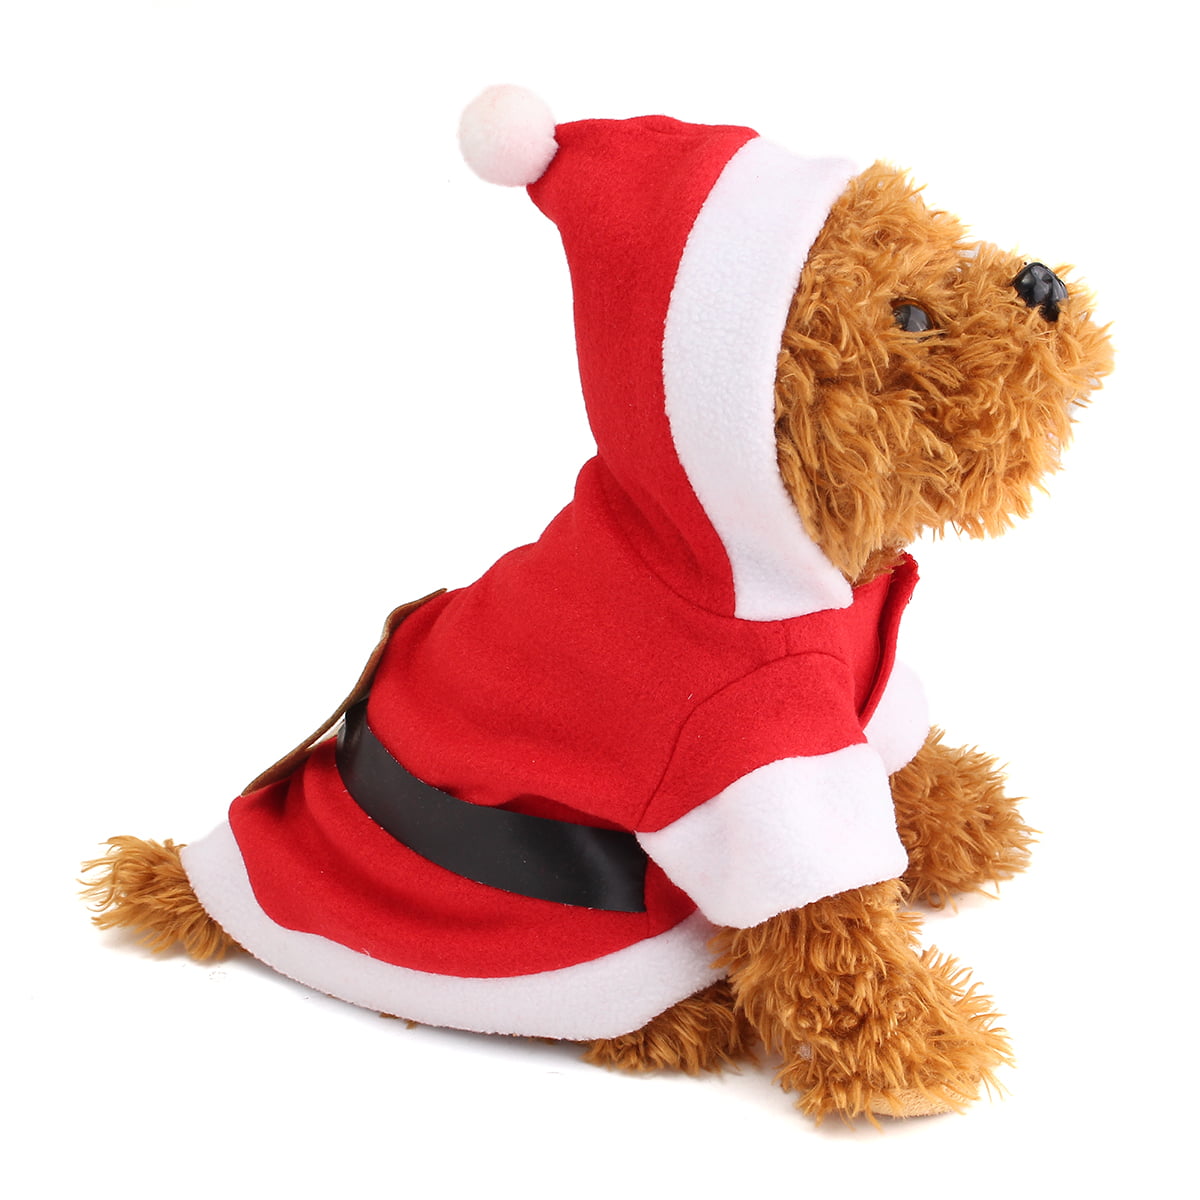 POPETPOP Christmas Dog Costume Pet Cat Clothes Xmas Holiday Pet Outfit for Dogs Puppy Kitten Cats